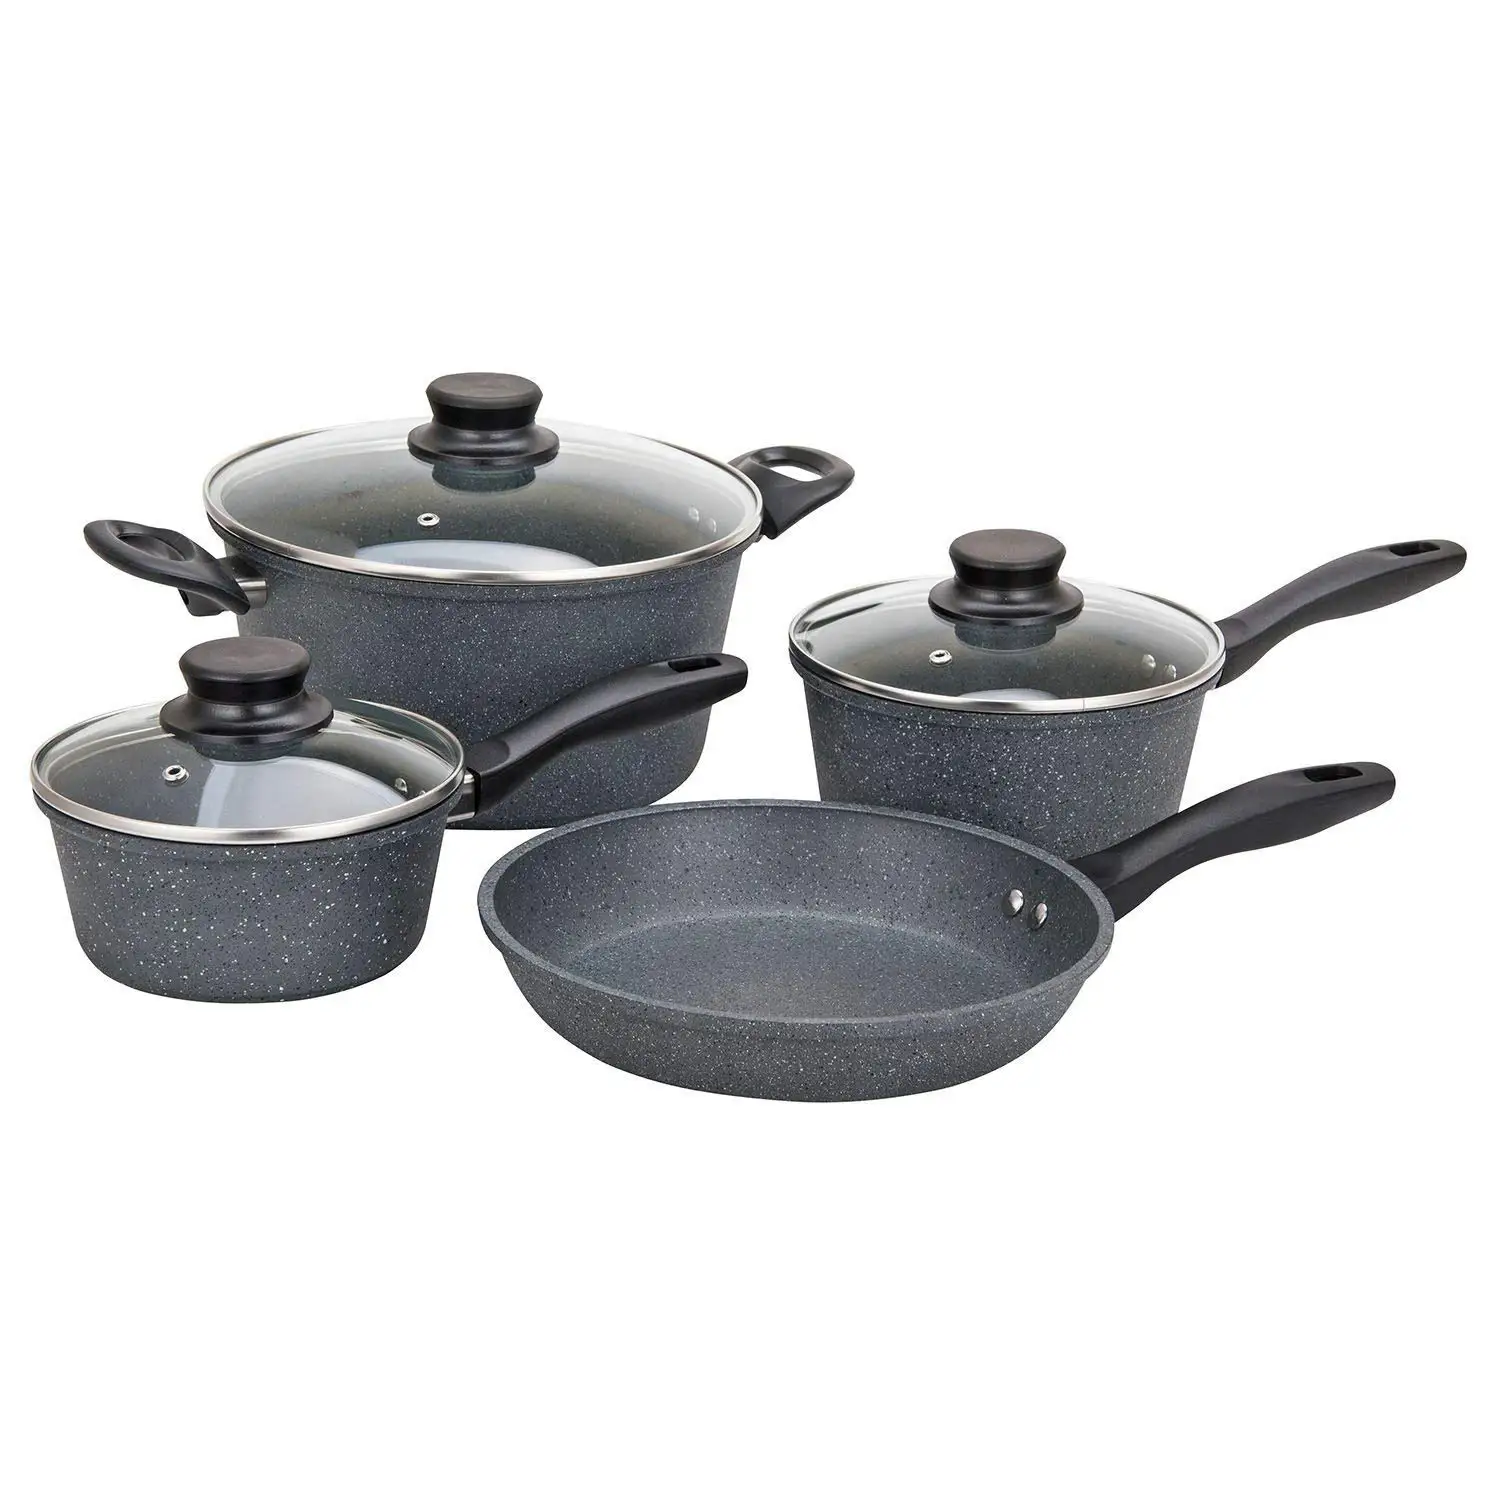 Cheap Korean Marble Cookware, find Korean Marble Cookware deals on line at